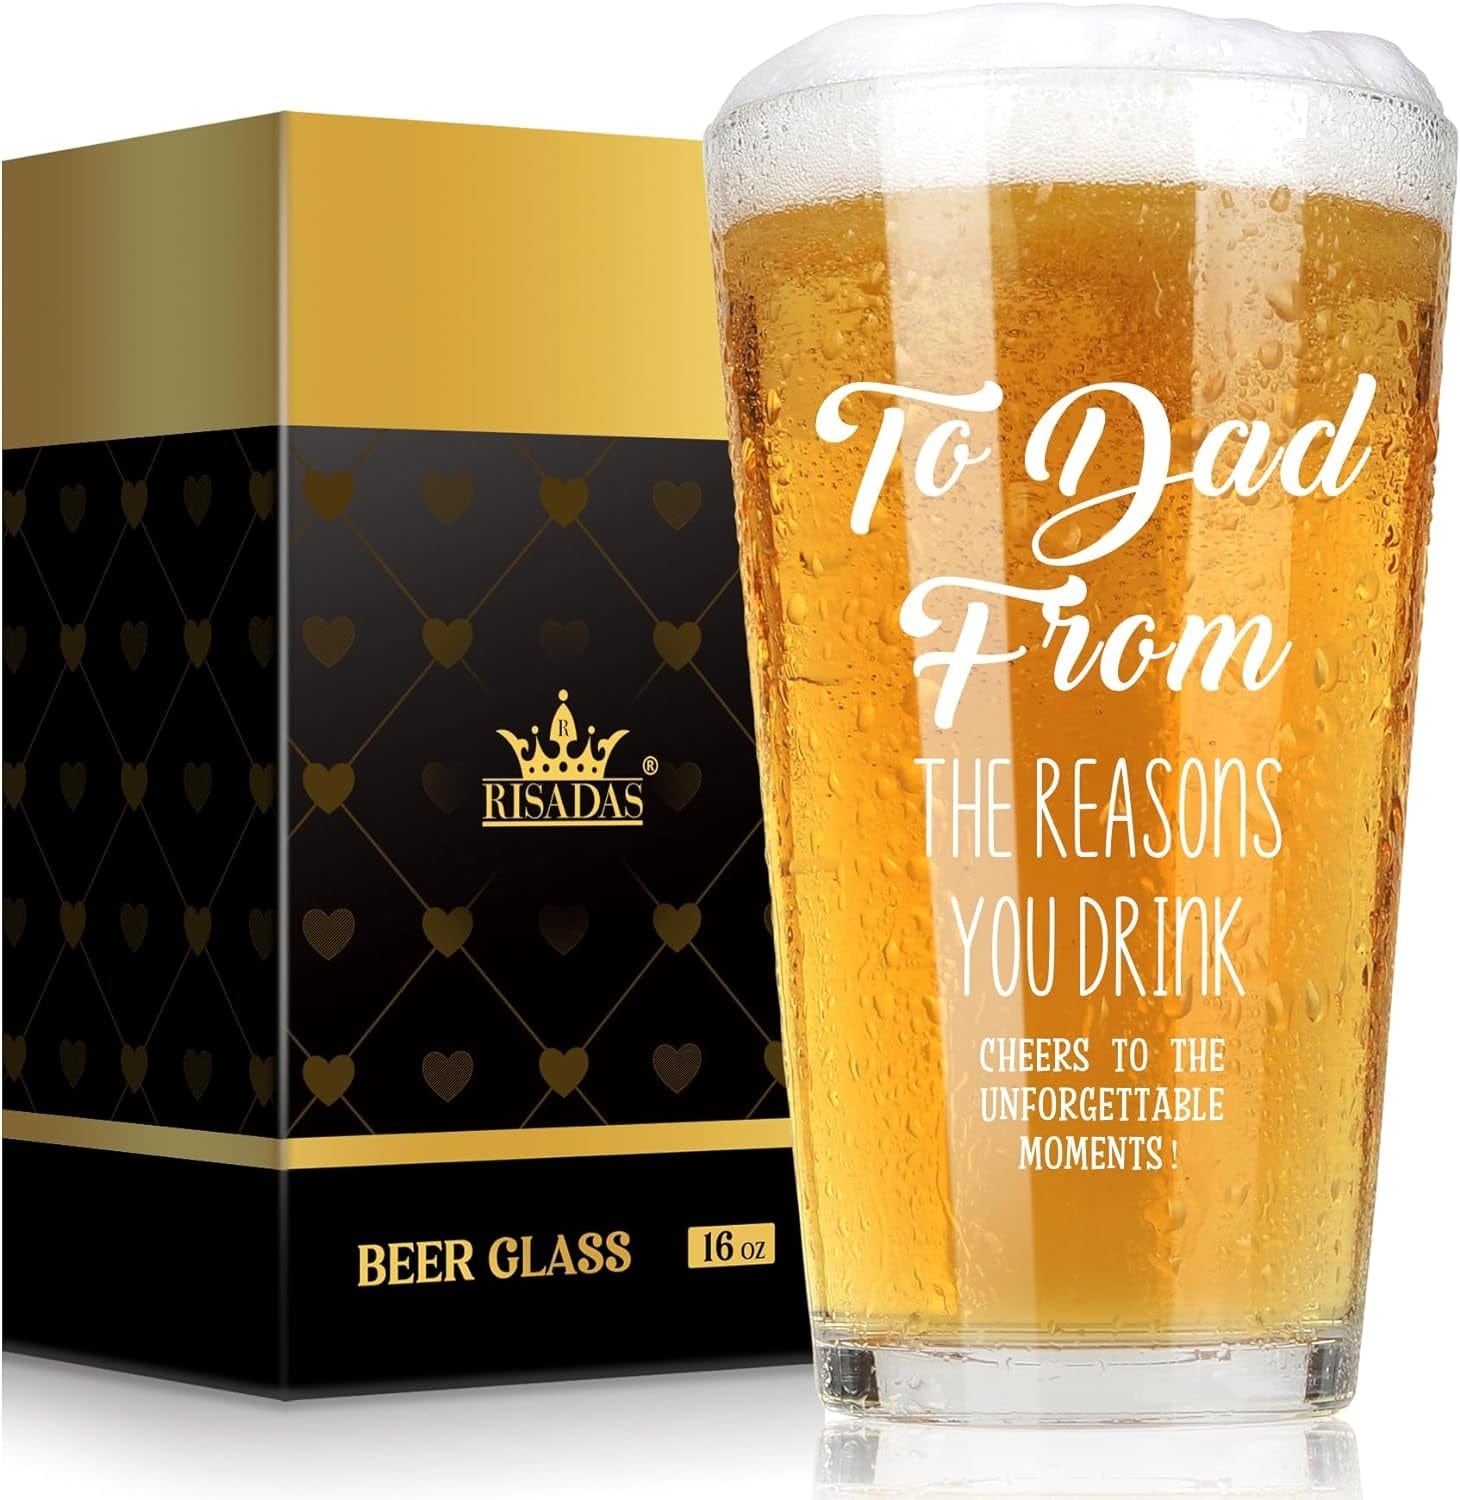 GeckoCustom Fathers Day Dad Gifts - Gifts for Dad, Fathers Day Dad Gifts from Daughter, Wife, Son - Dad Gifts for Fathers Day, Birthday Christmas Funny Gift for Dad, Step Dad, Bonus Dad, Husband, 16 Oz Beer Glass Beer Glass Engraved Dad,From The Reasons